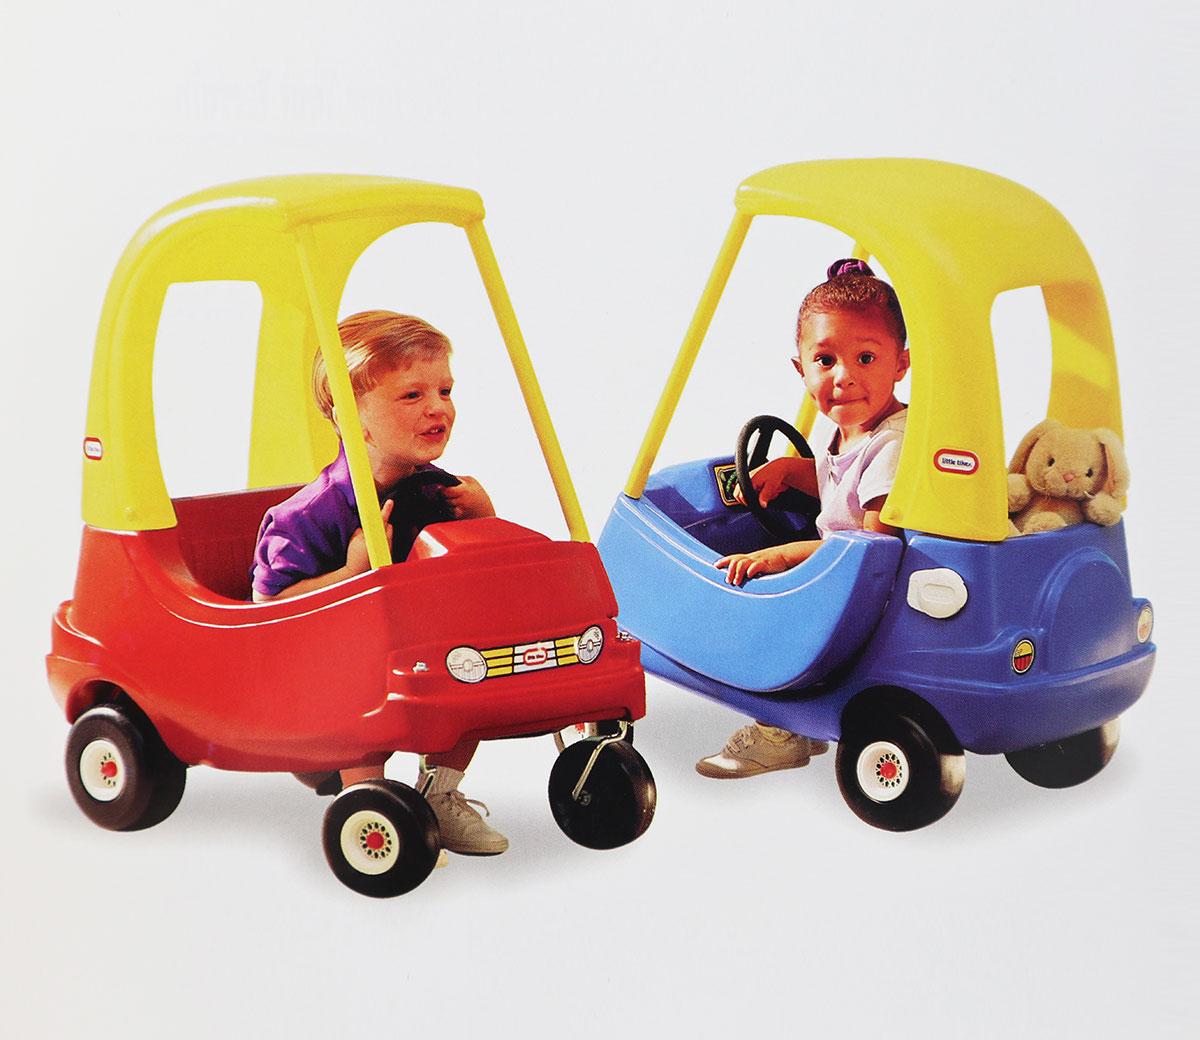 the cozy coupe